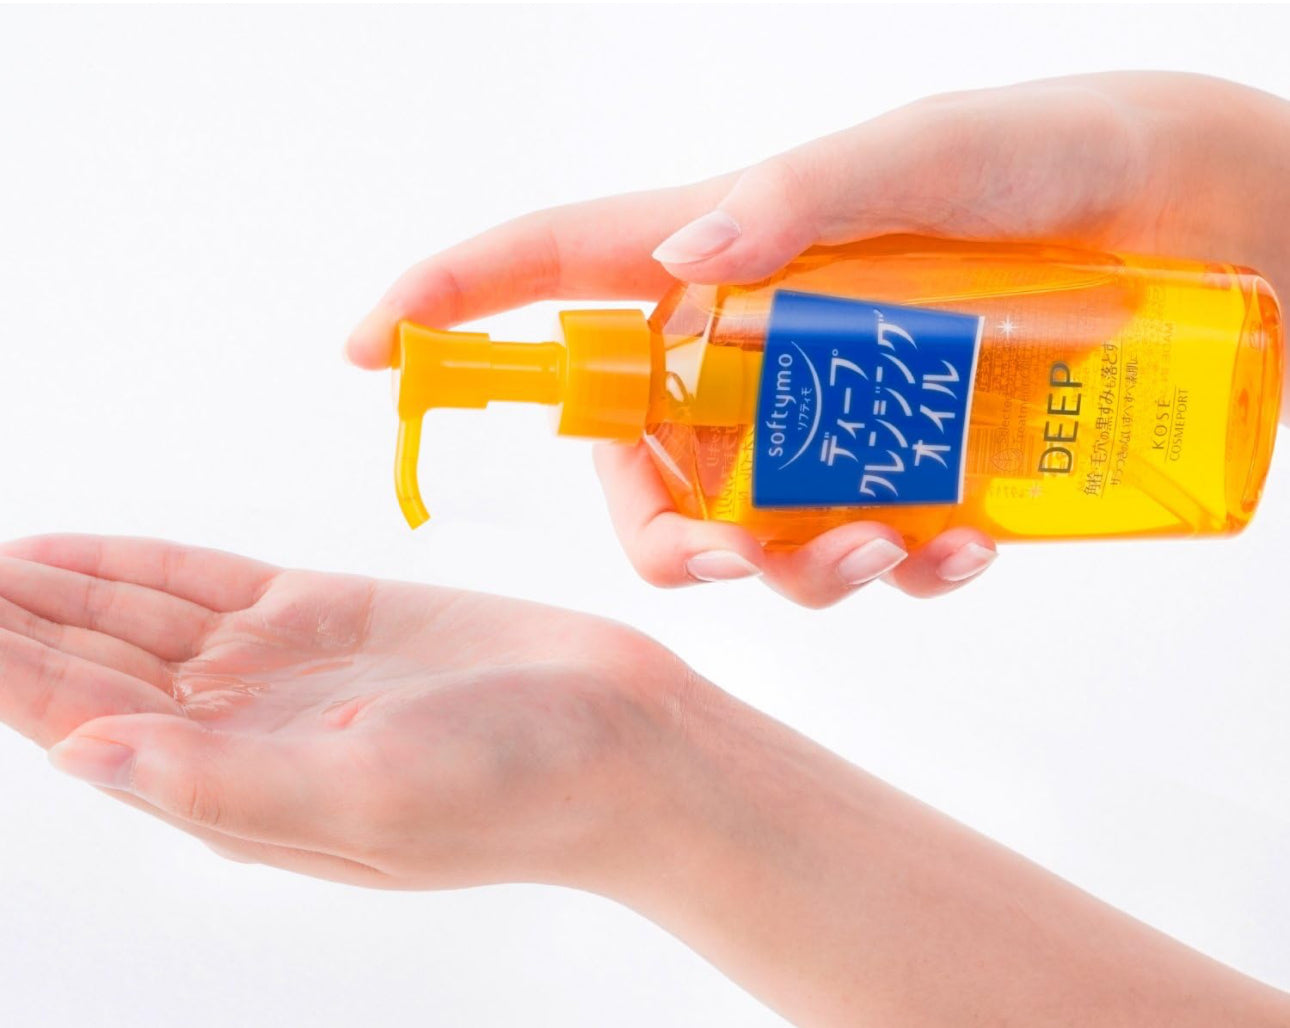 KOSE SOFT MO DEEP CLEANSING OIL